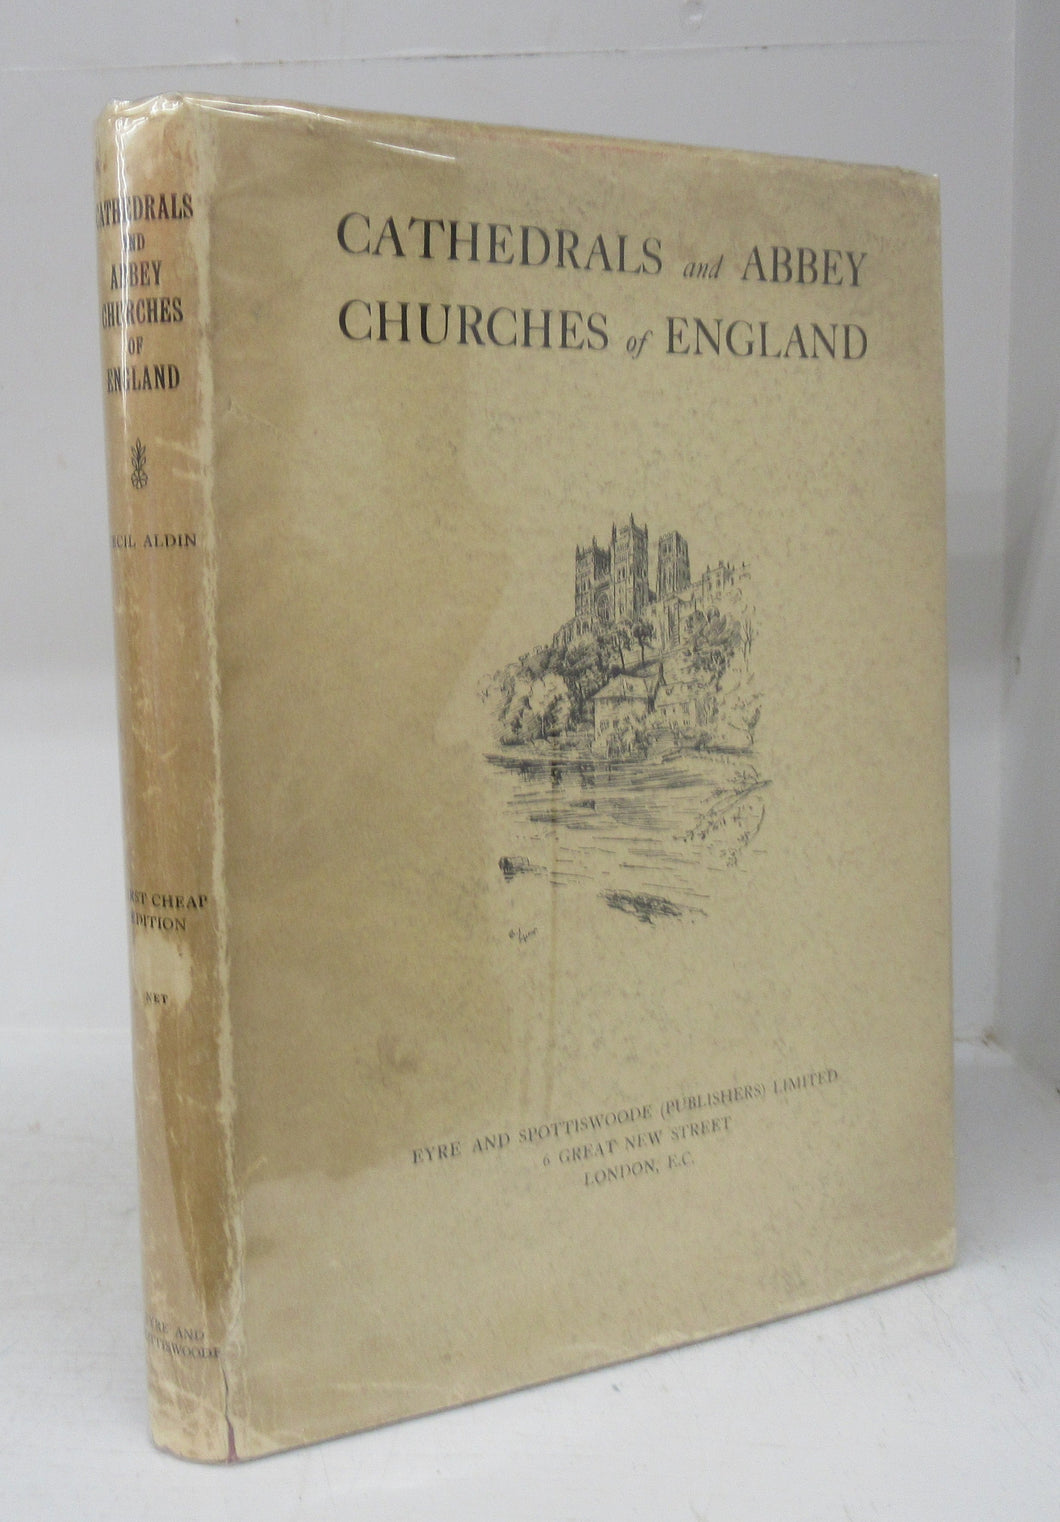 Cathedrals and Abbey Churches of England